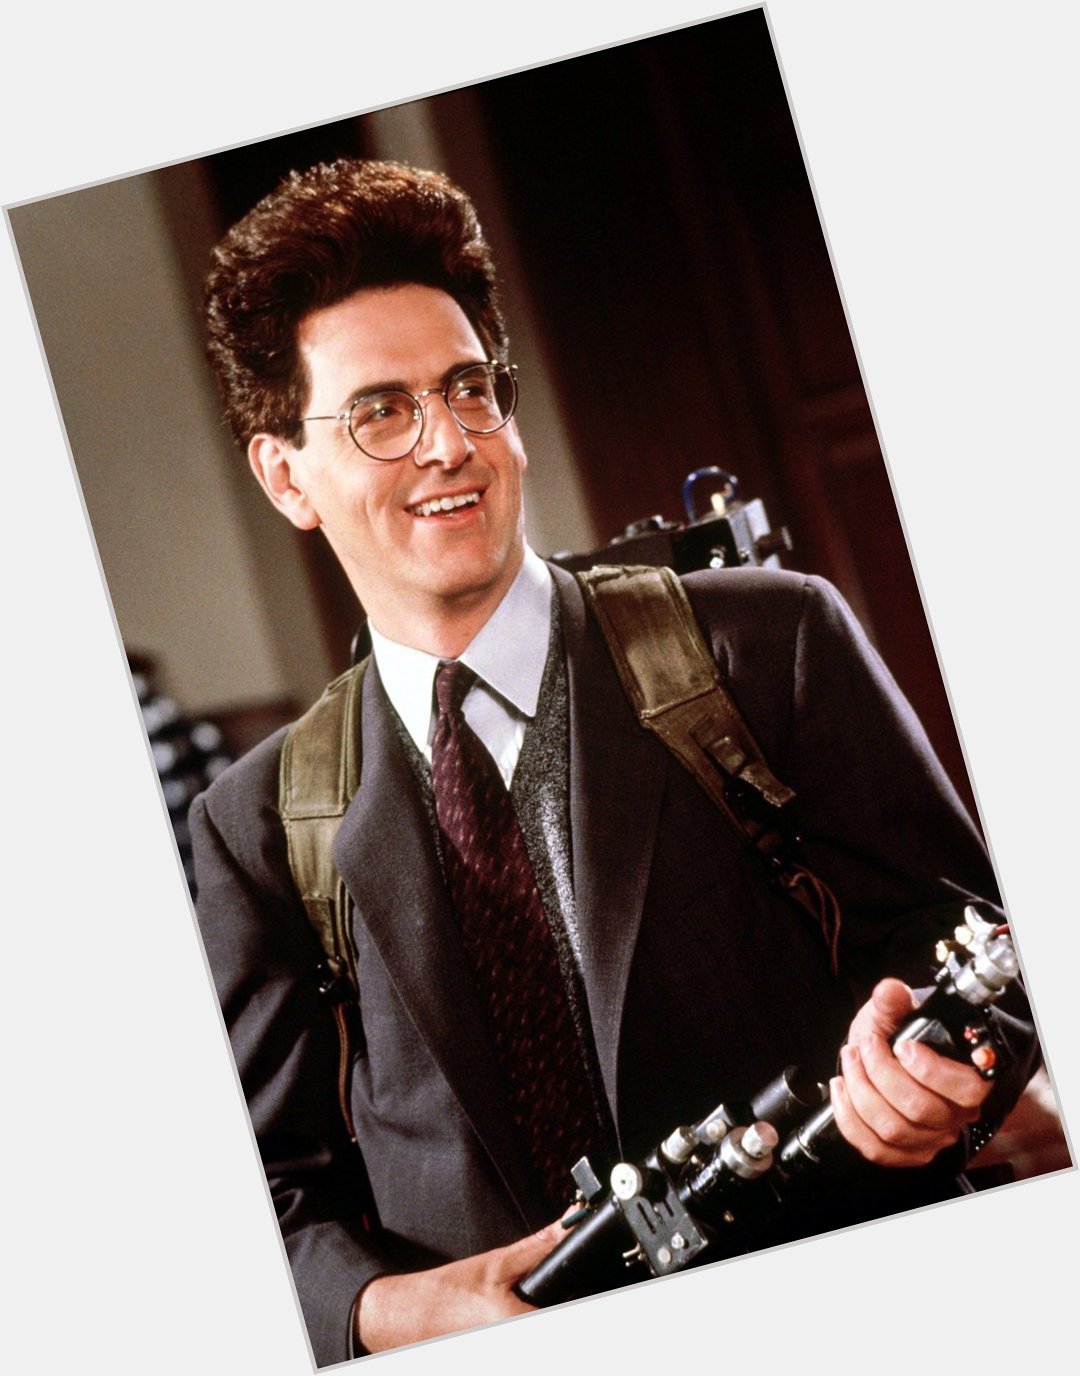 Happy birthday to Harold Ramis, who would have been 78 years old today.  